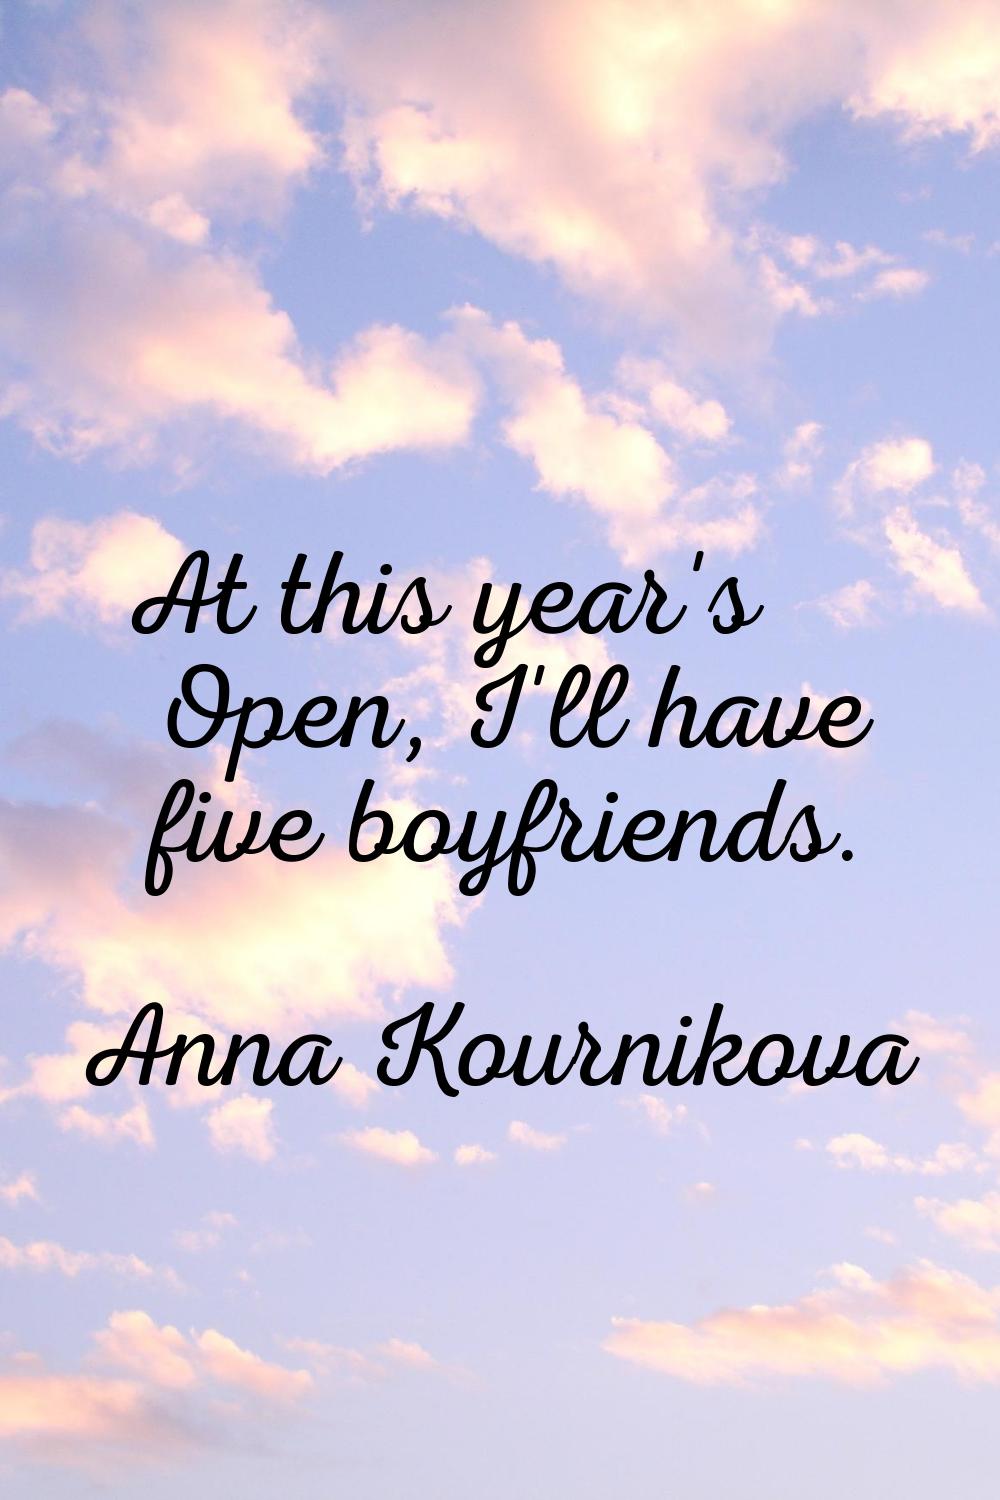 At this year's Open, I'll have five boyfriends.